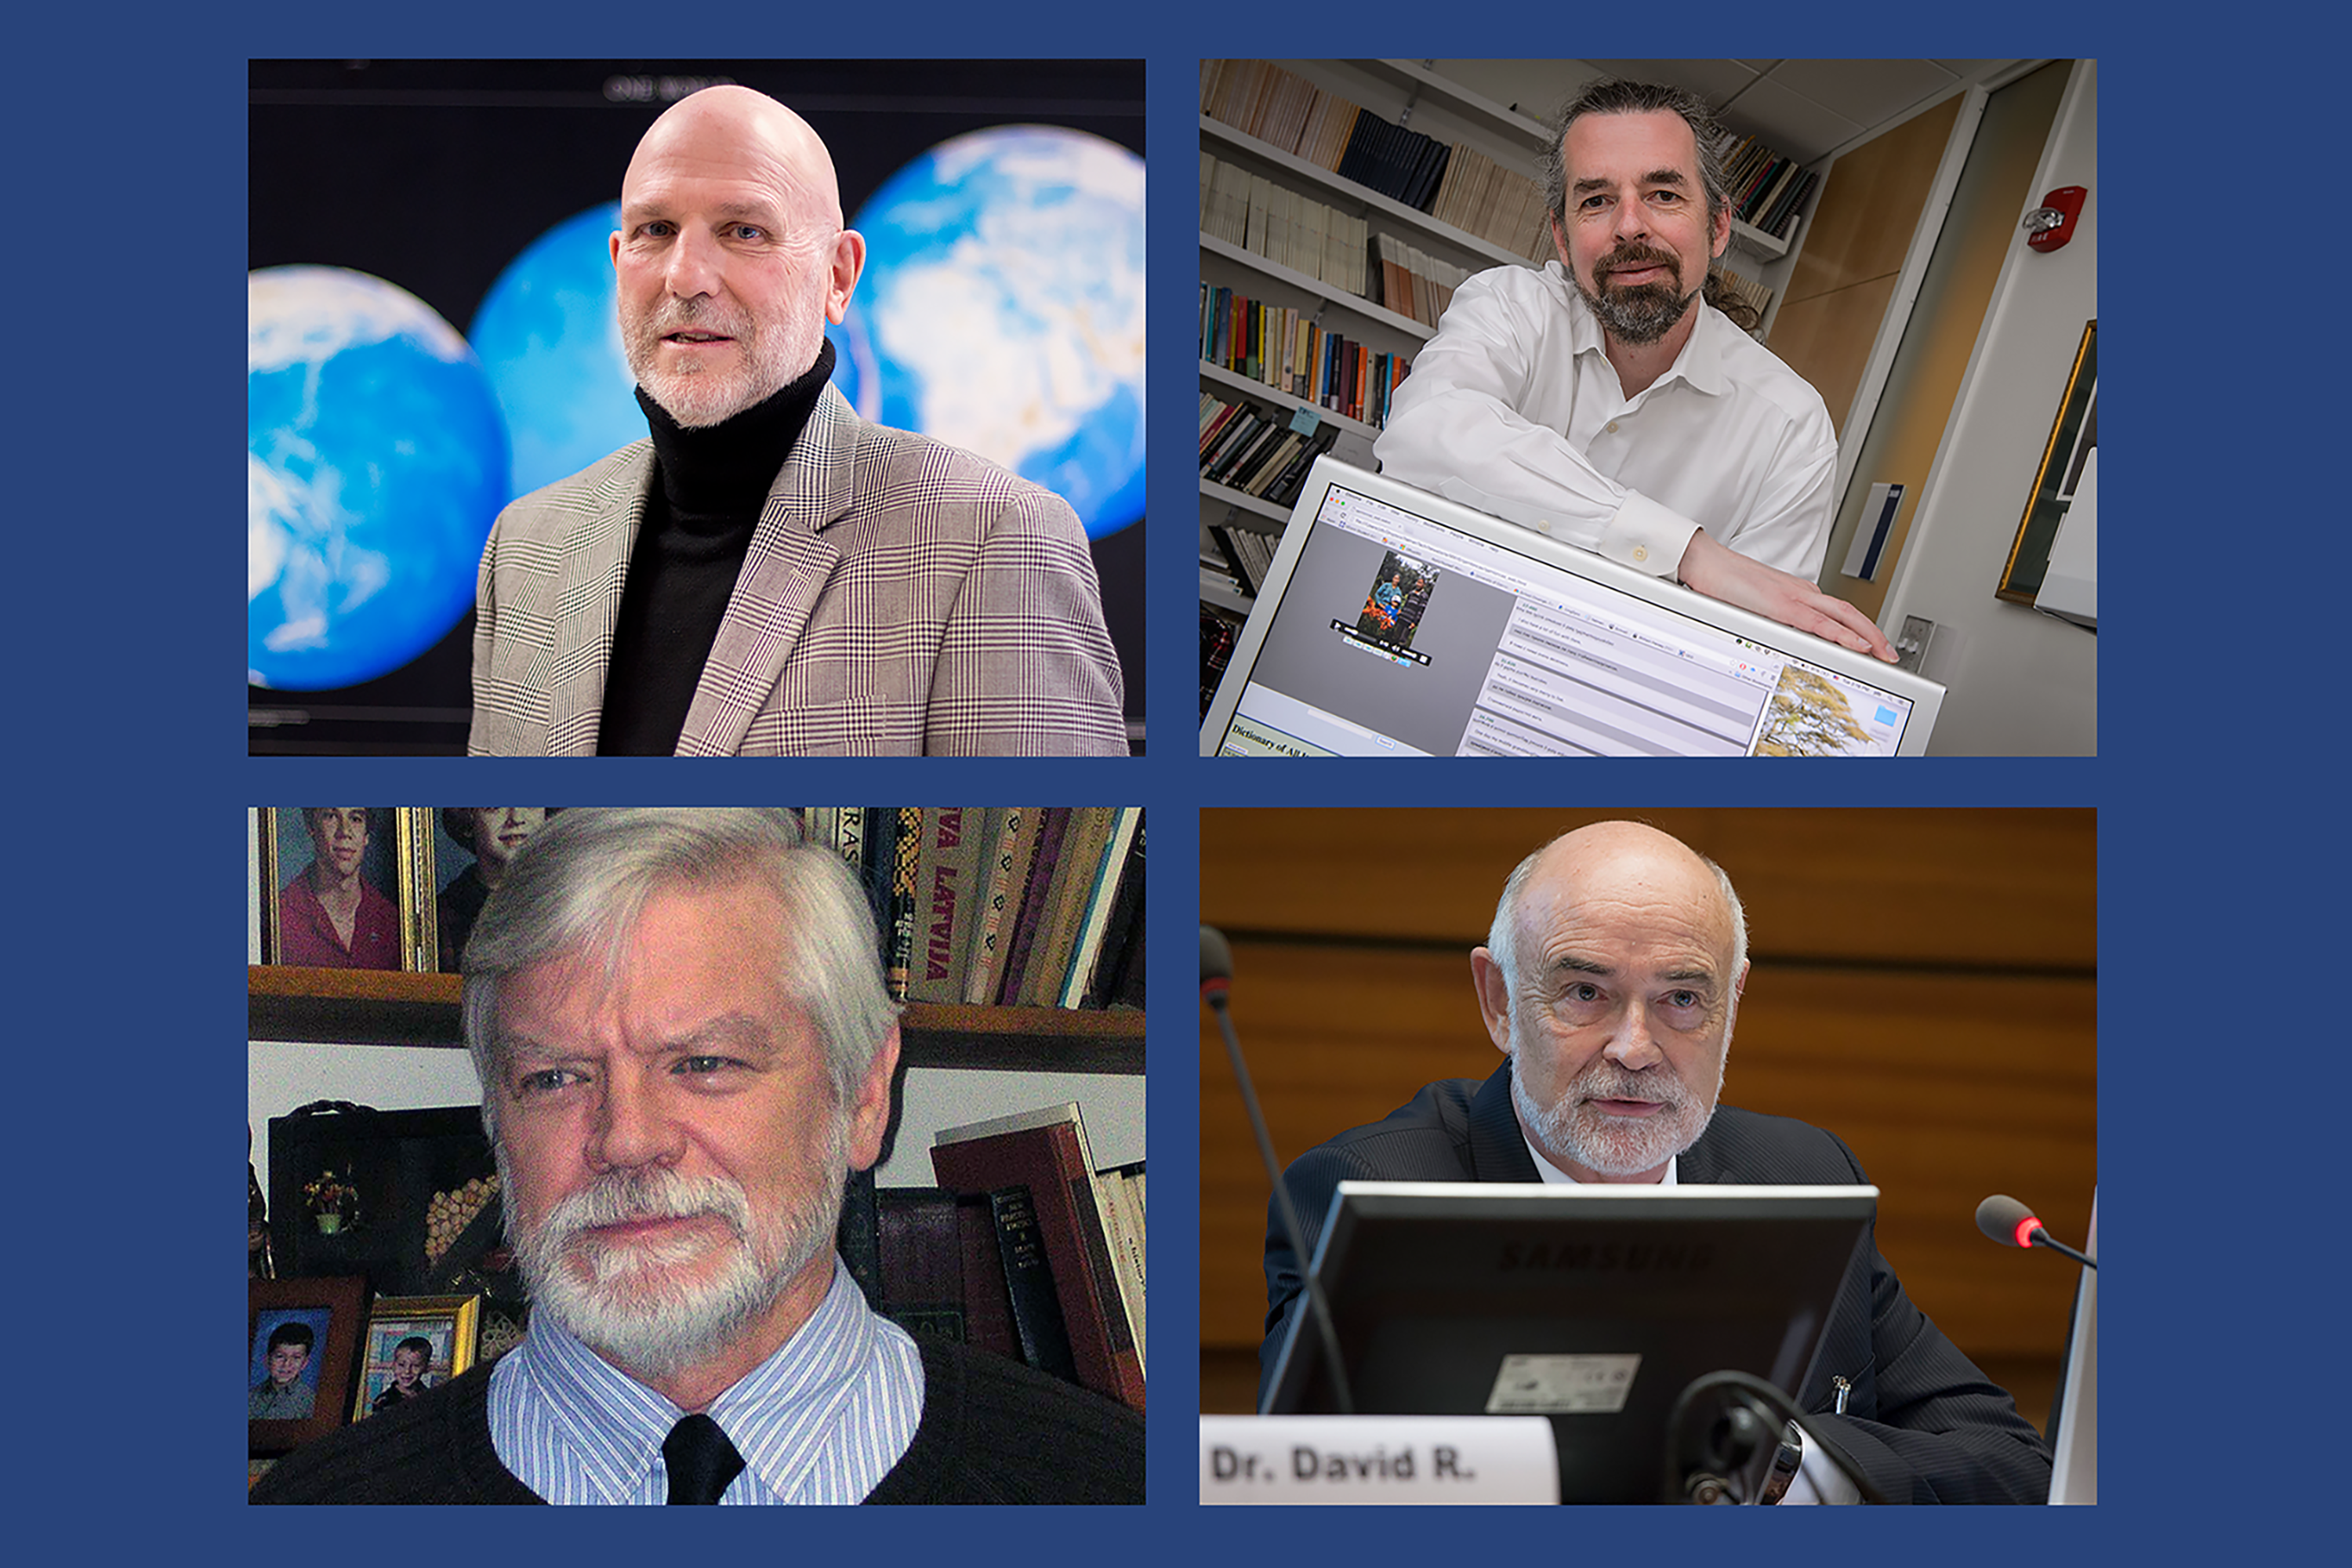 Four UConn professors have been named Fellows of the AAAS. Clockwise from top left: Mike Willig, Jonathan Bobaljik, David Benson, and Arthur Hand.